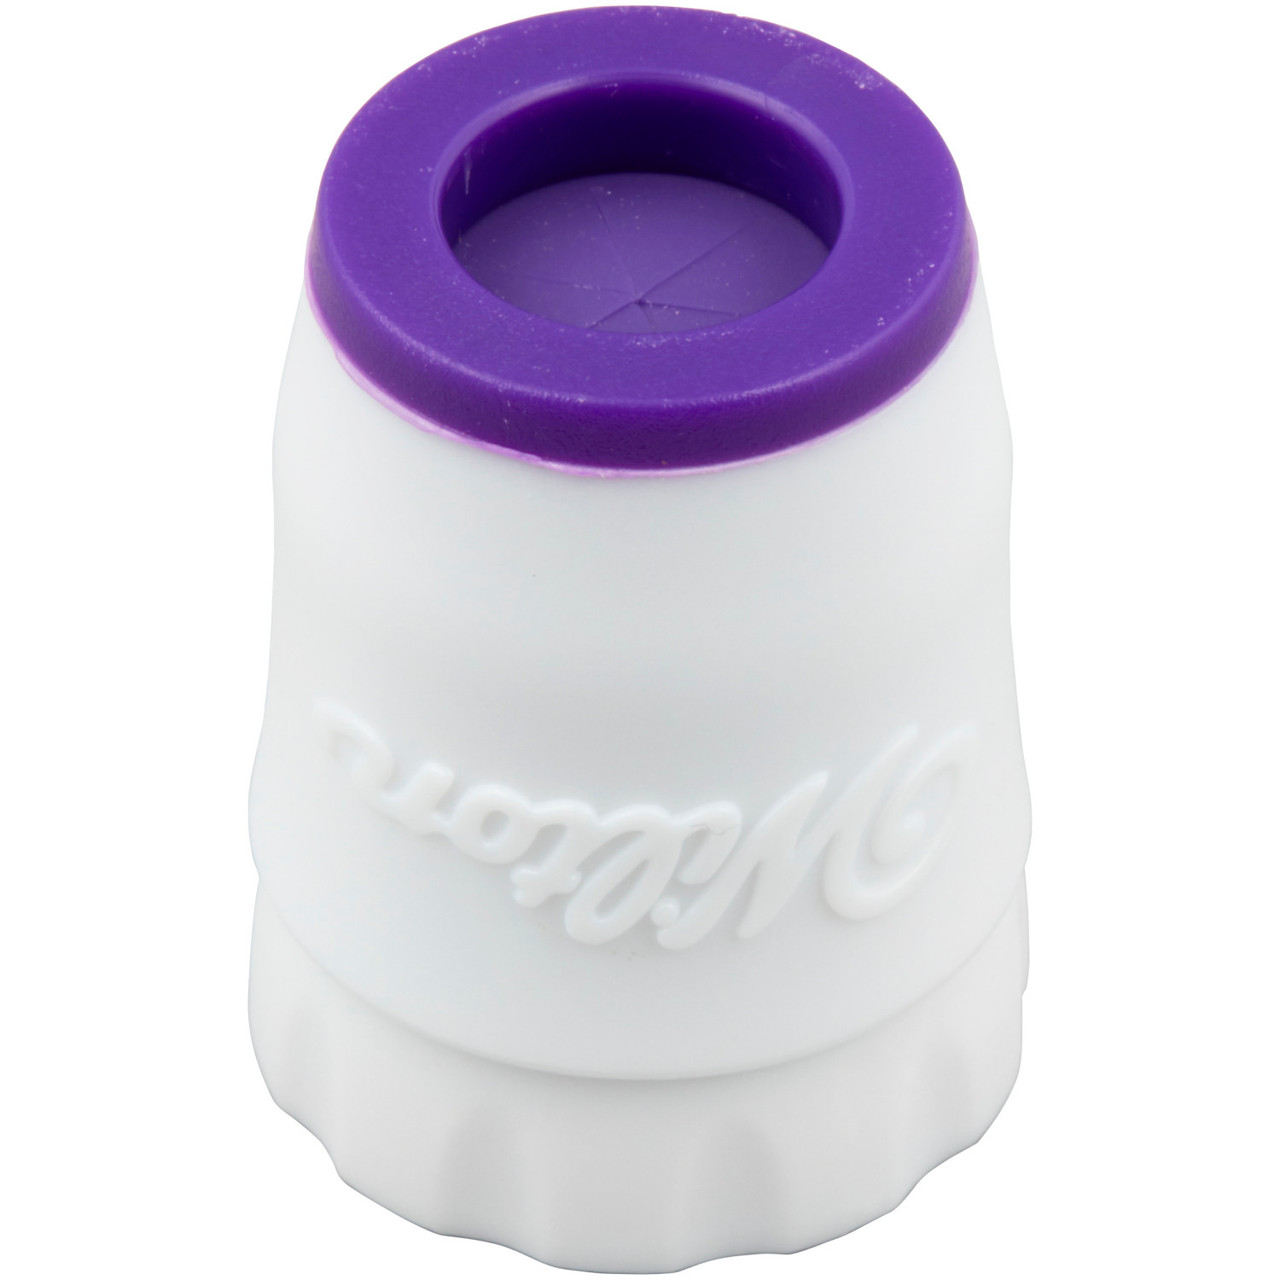 Product Review: Wilton Perfect Fill Batter Dispenser